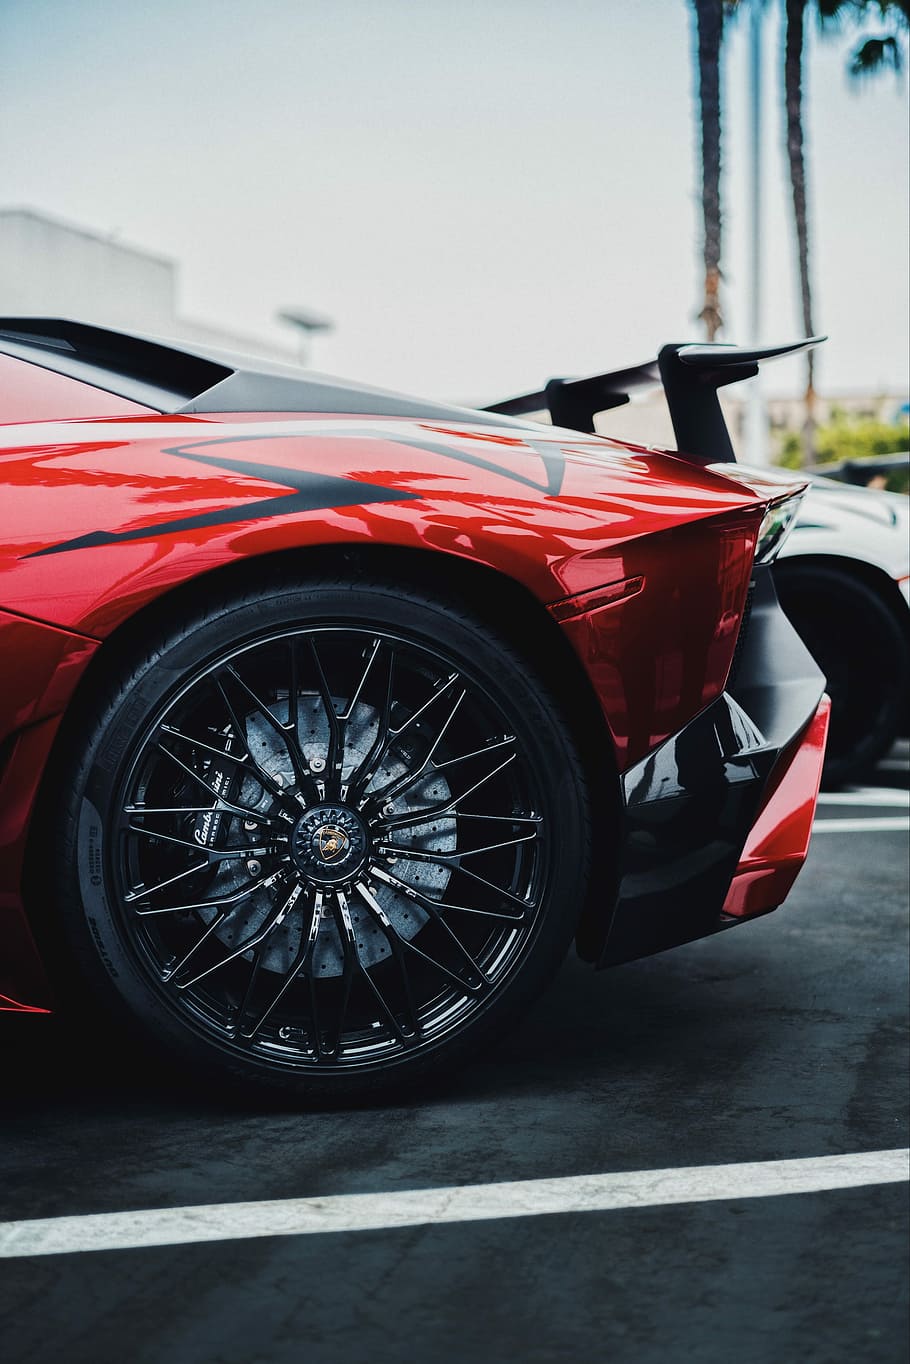 black and red Lamborghini Aventador SV rear left side, red car with spoiler, HD wallpaper